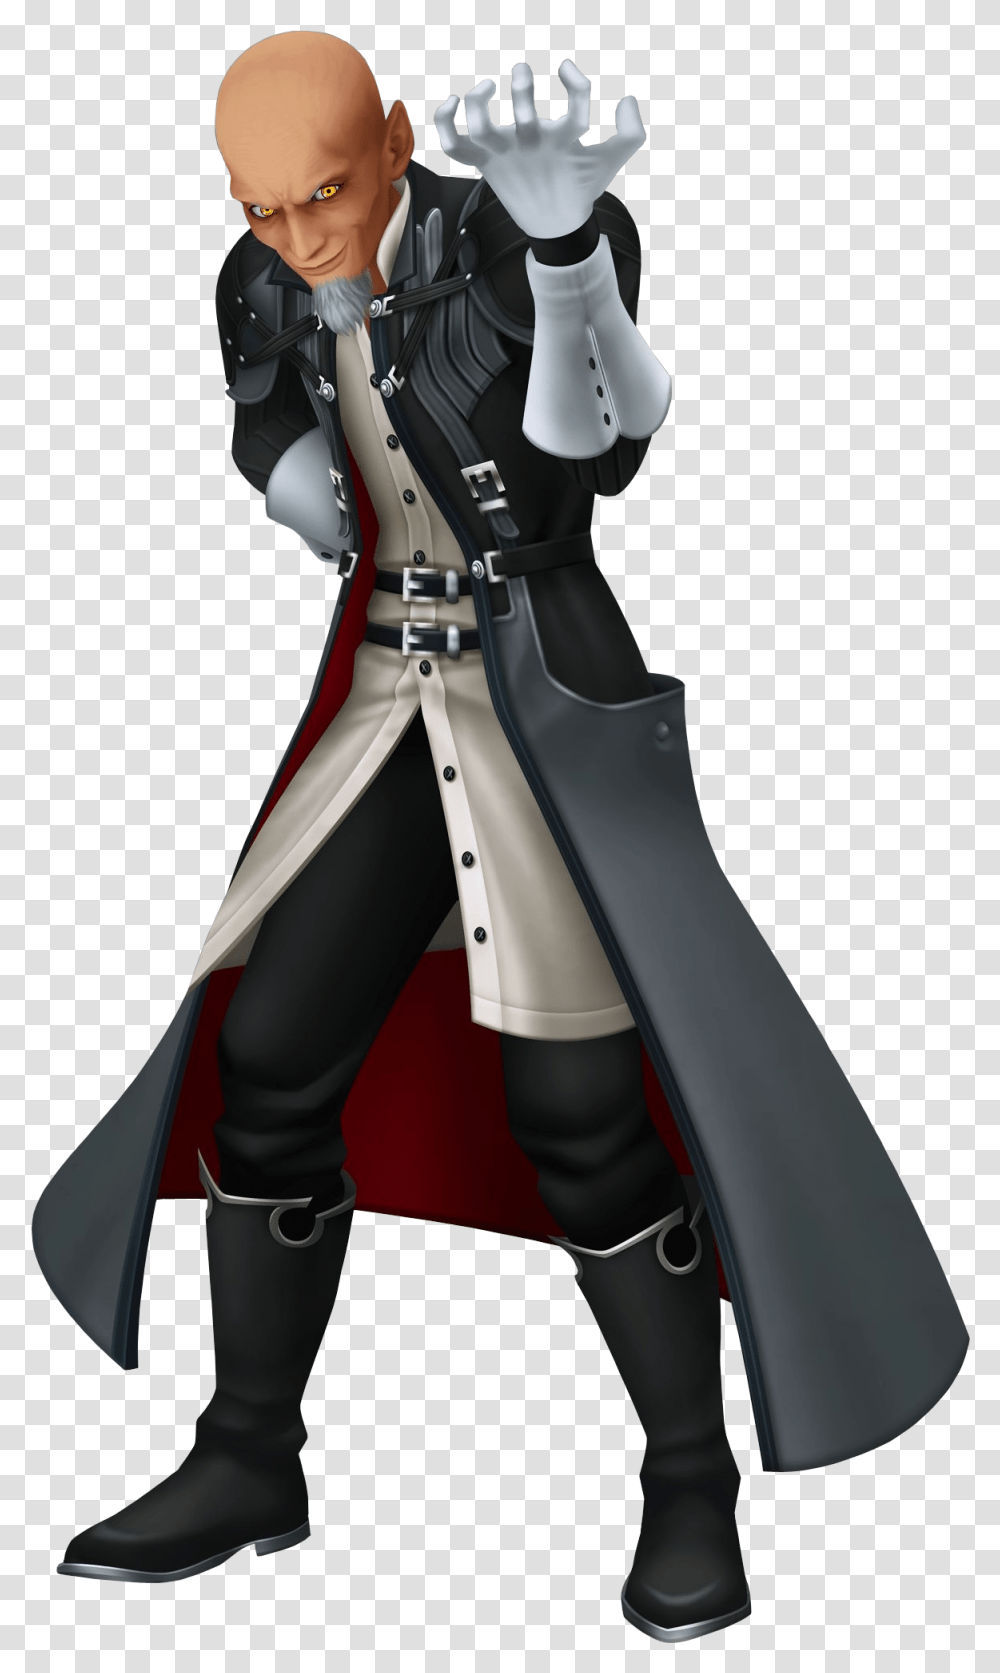 Characters Of Kingdom Hearts & Free Bad Guy In Kingdom Hearts, Person, Human, Costume, Clothing Transparent Png